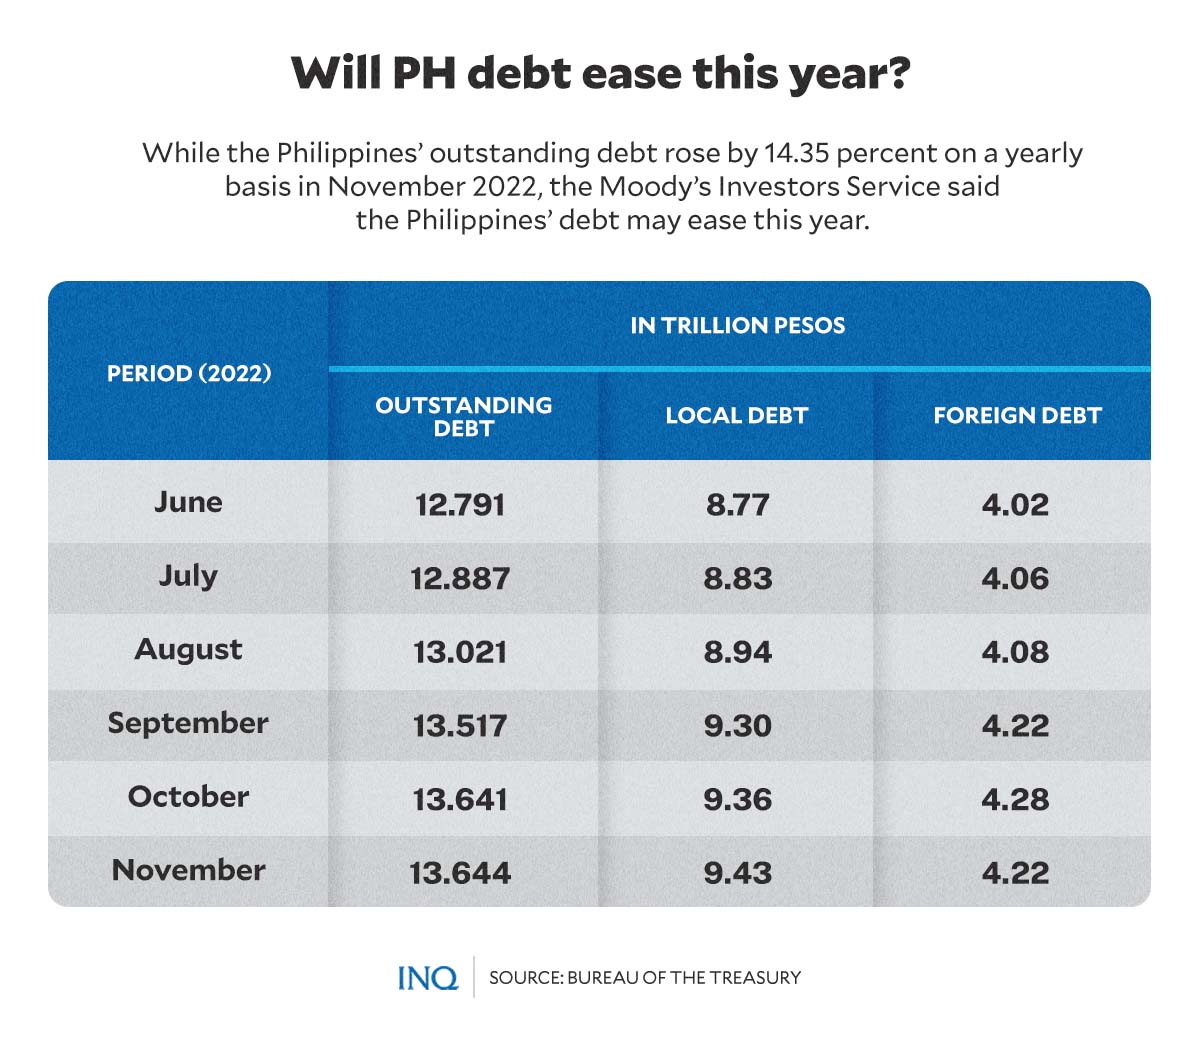 WILL PH DEBT EASE THIS YEAR_